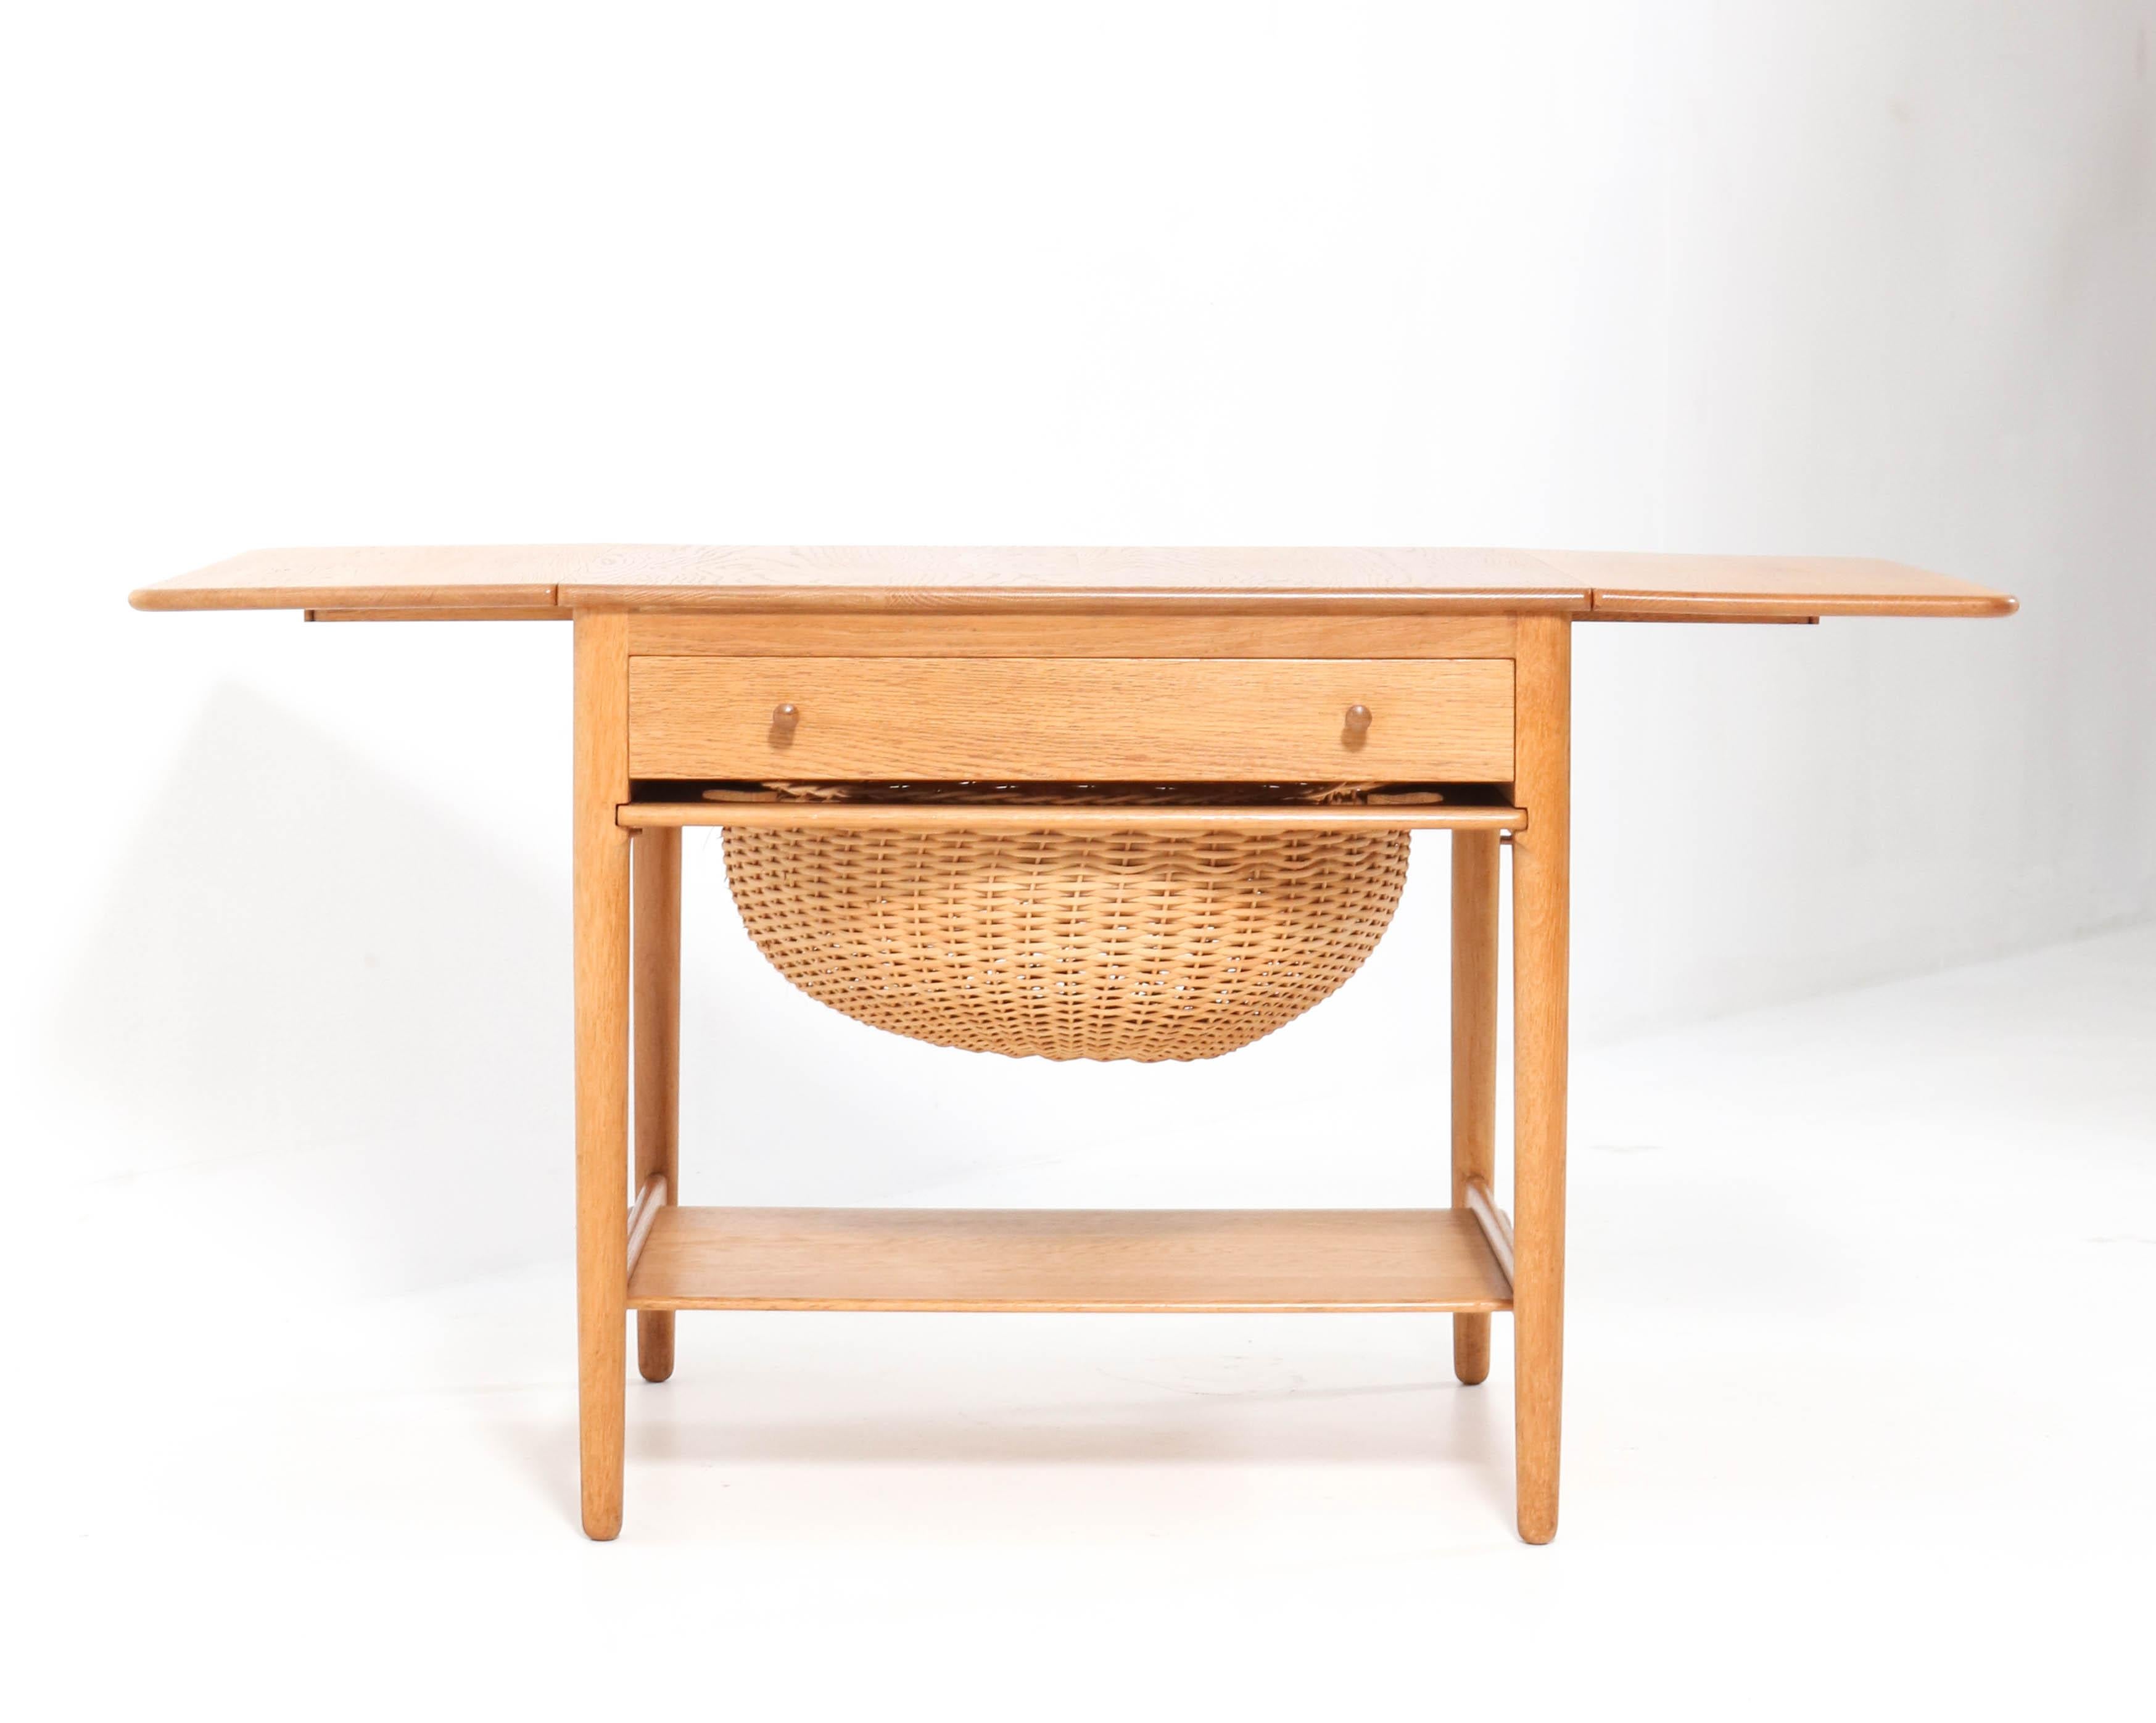 Rattan Mid-Century Modern AT-33 Sewing Table by Hans J. Wegner for Andreas Tuck, 1950s